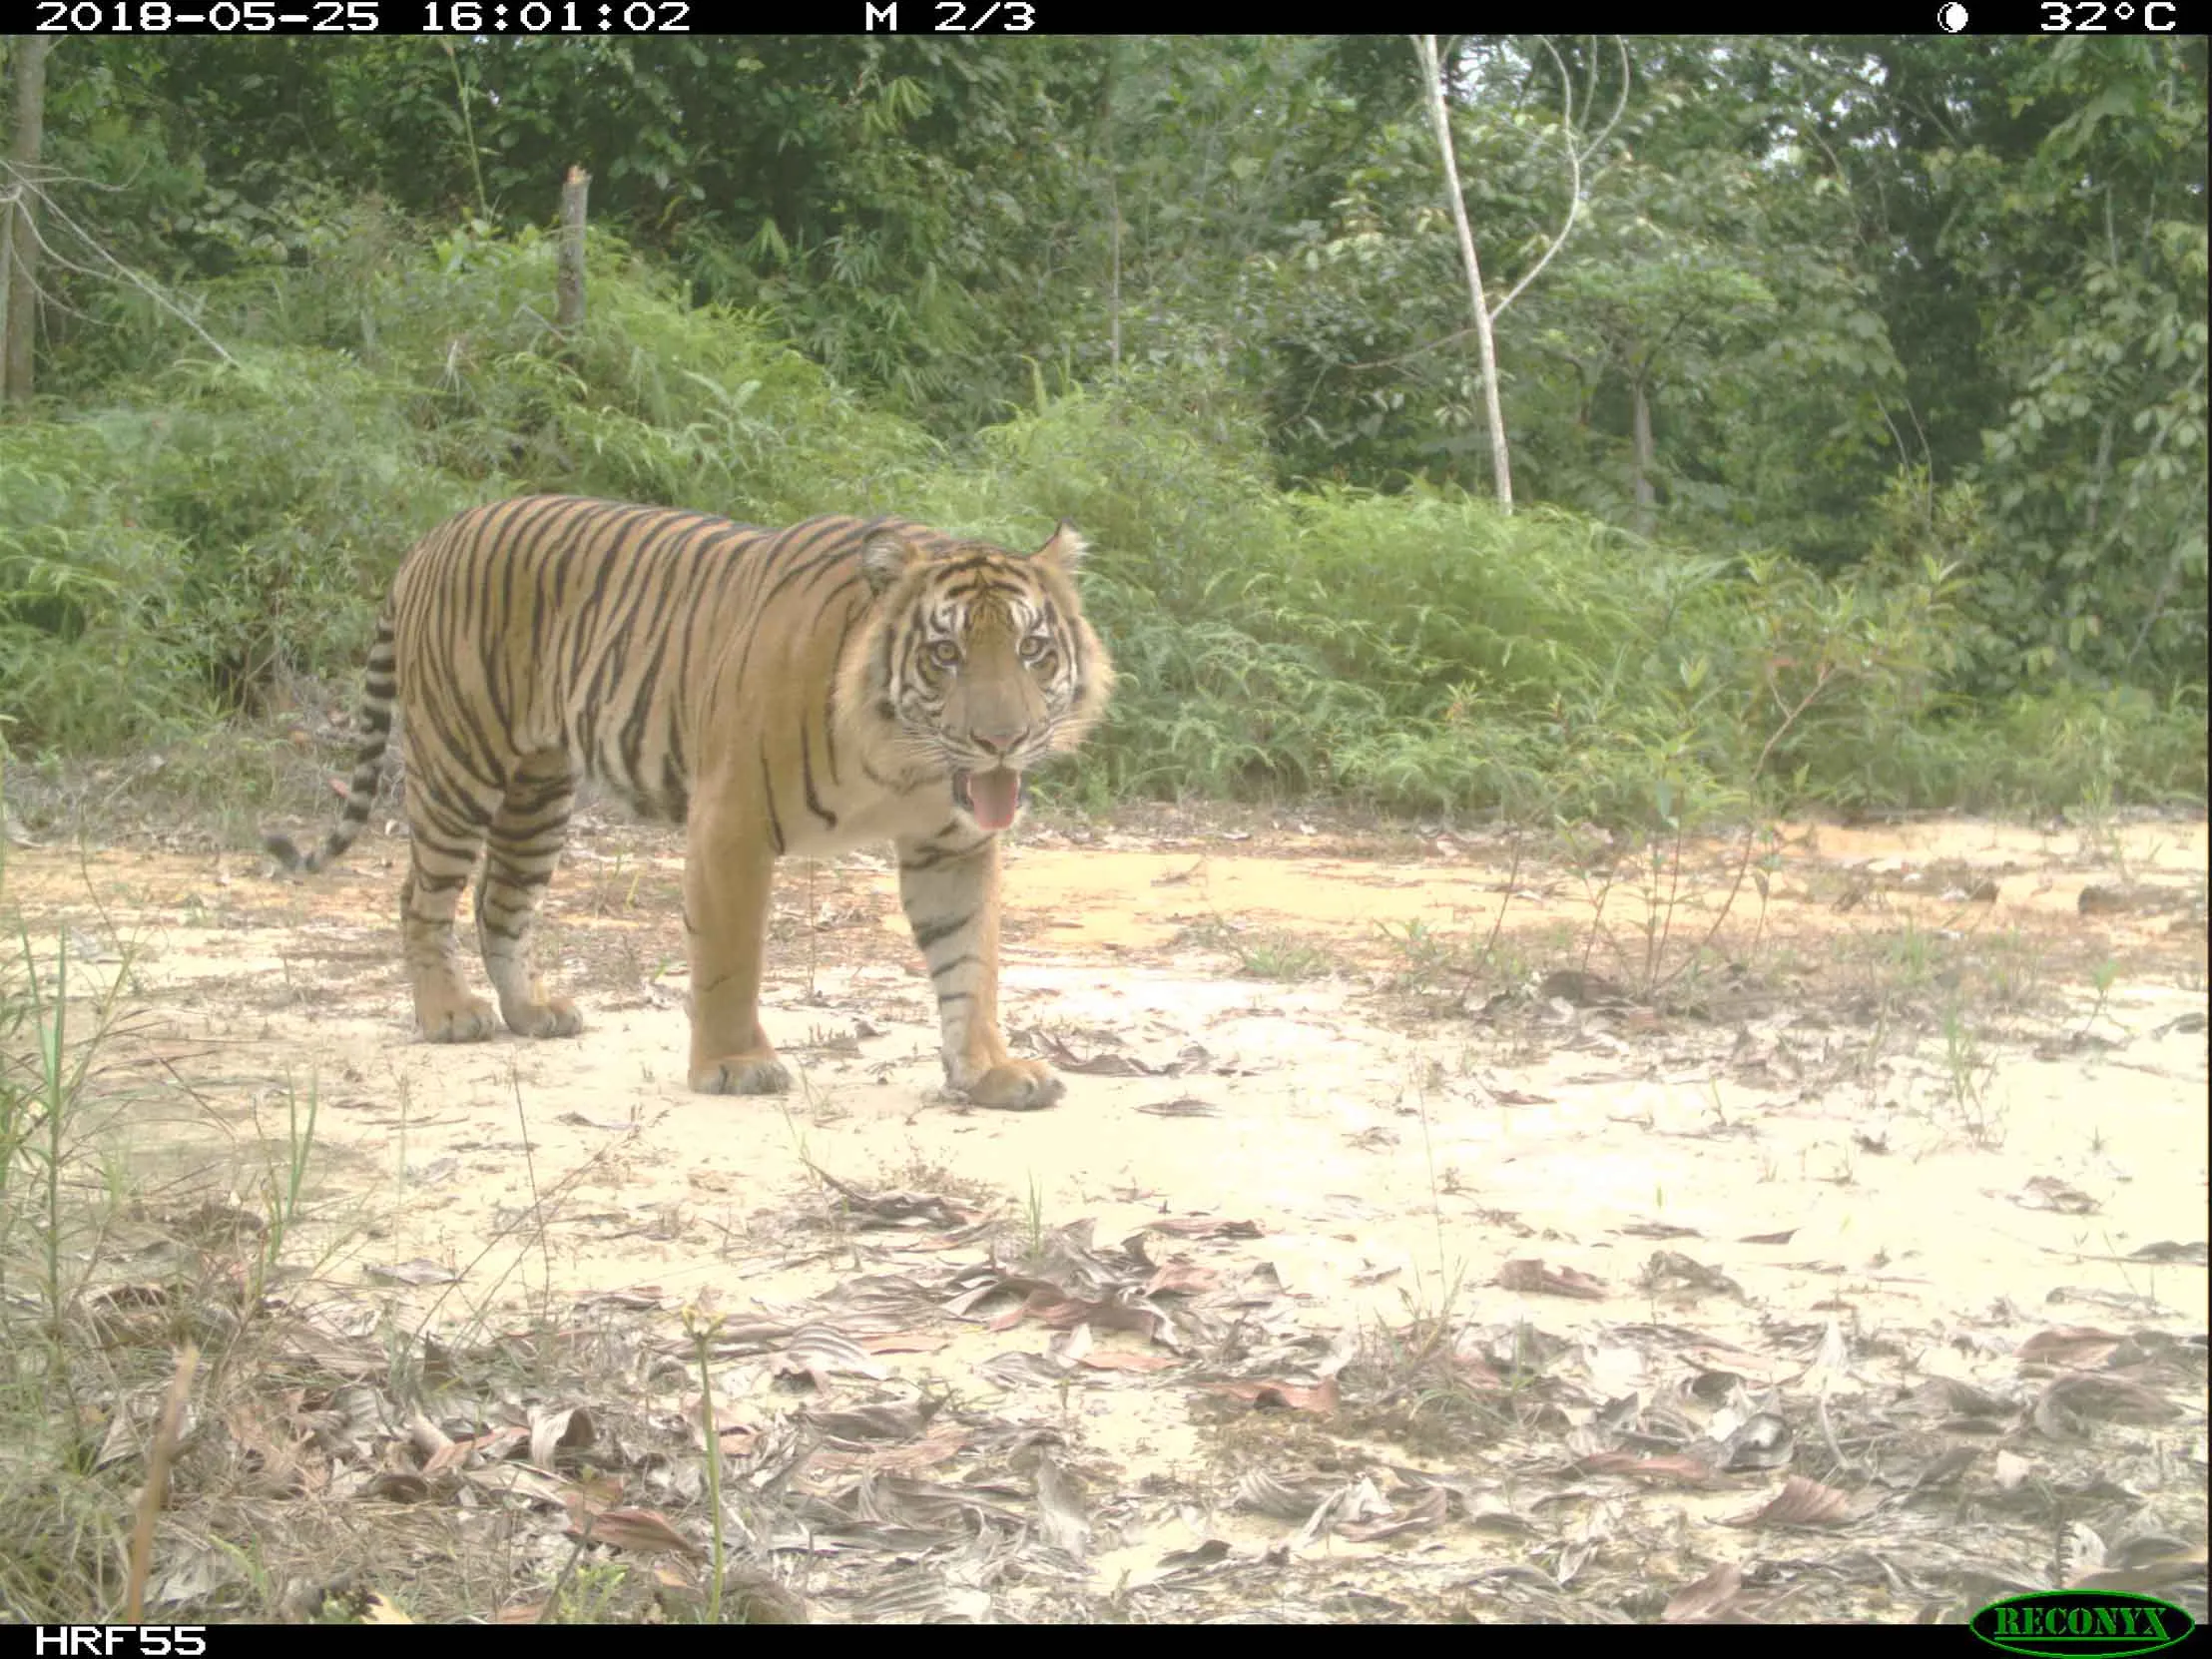 A Tiger walking through a clearing in the Harapan Rainforest.